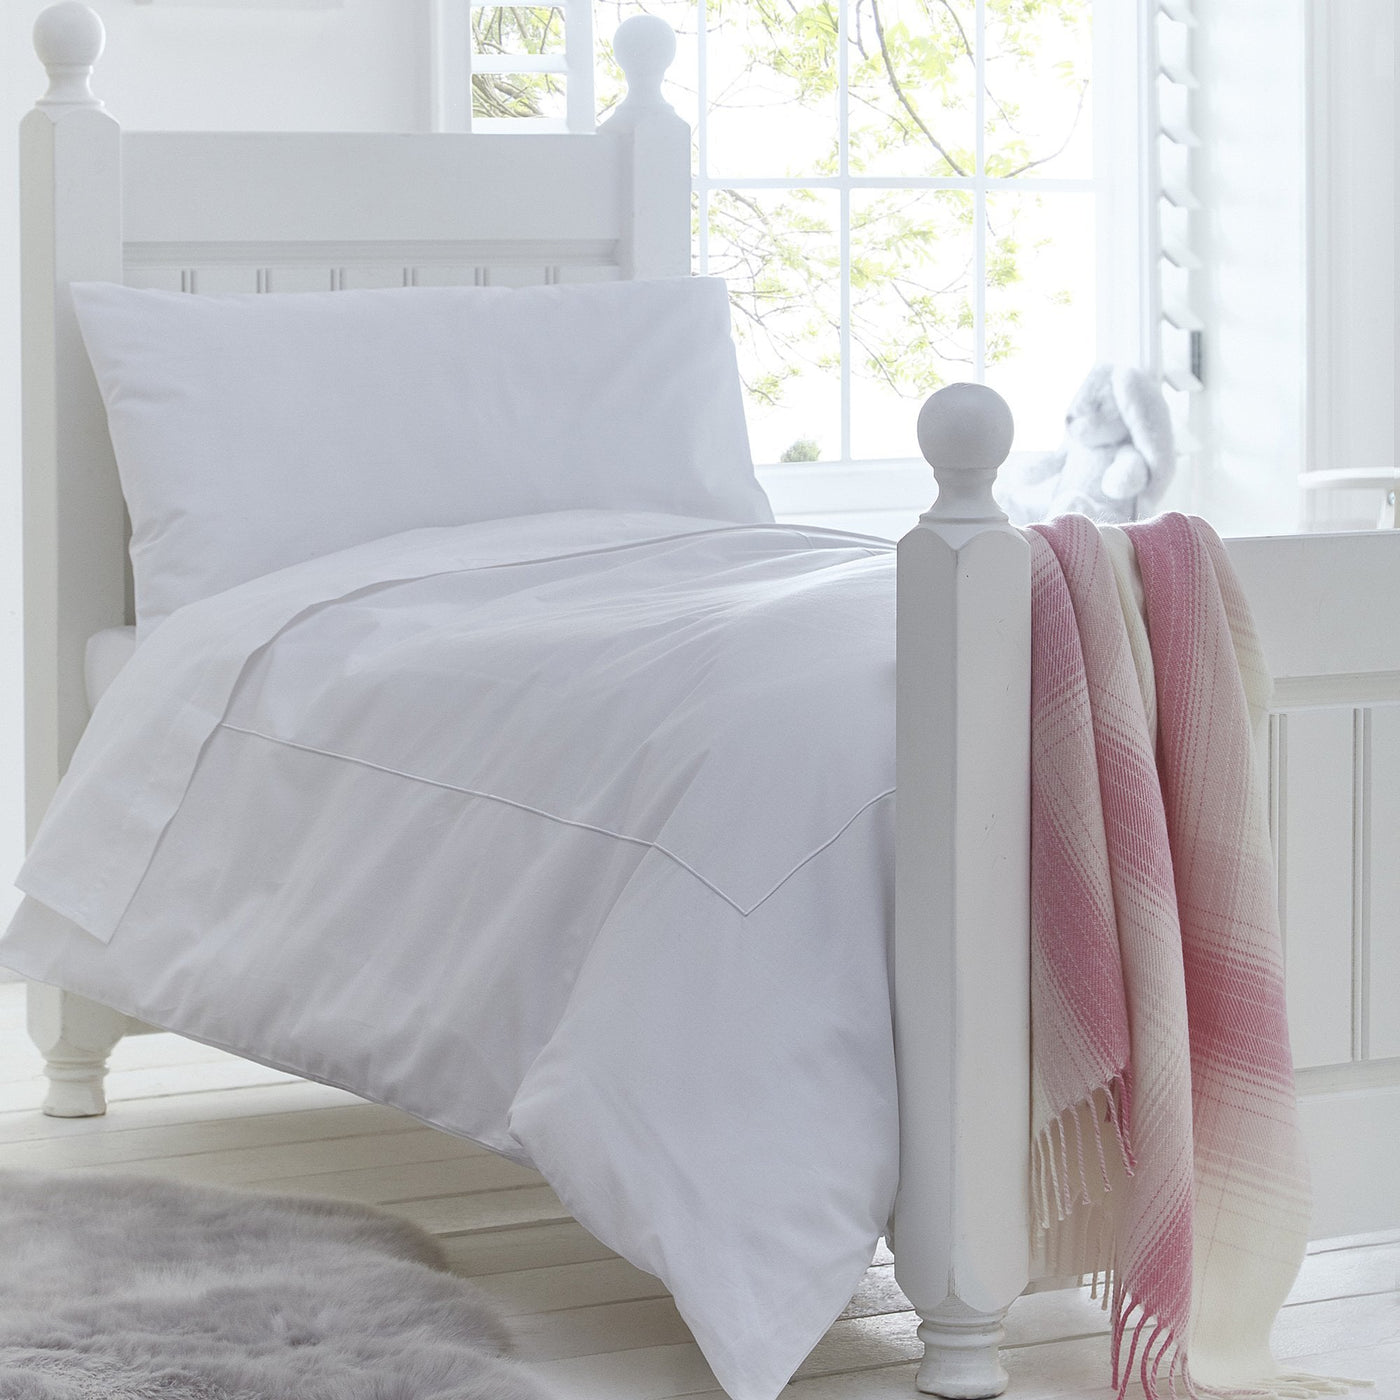 Seville Organic 600TC Sateen Childrens and Nursery Bed Linen Collection